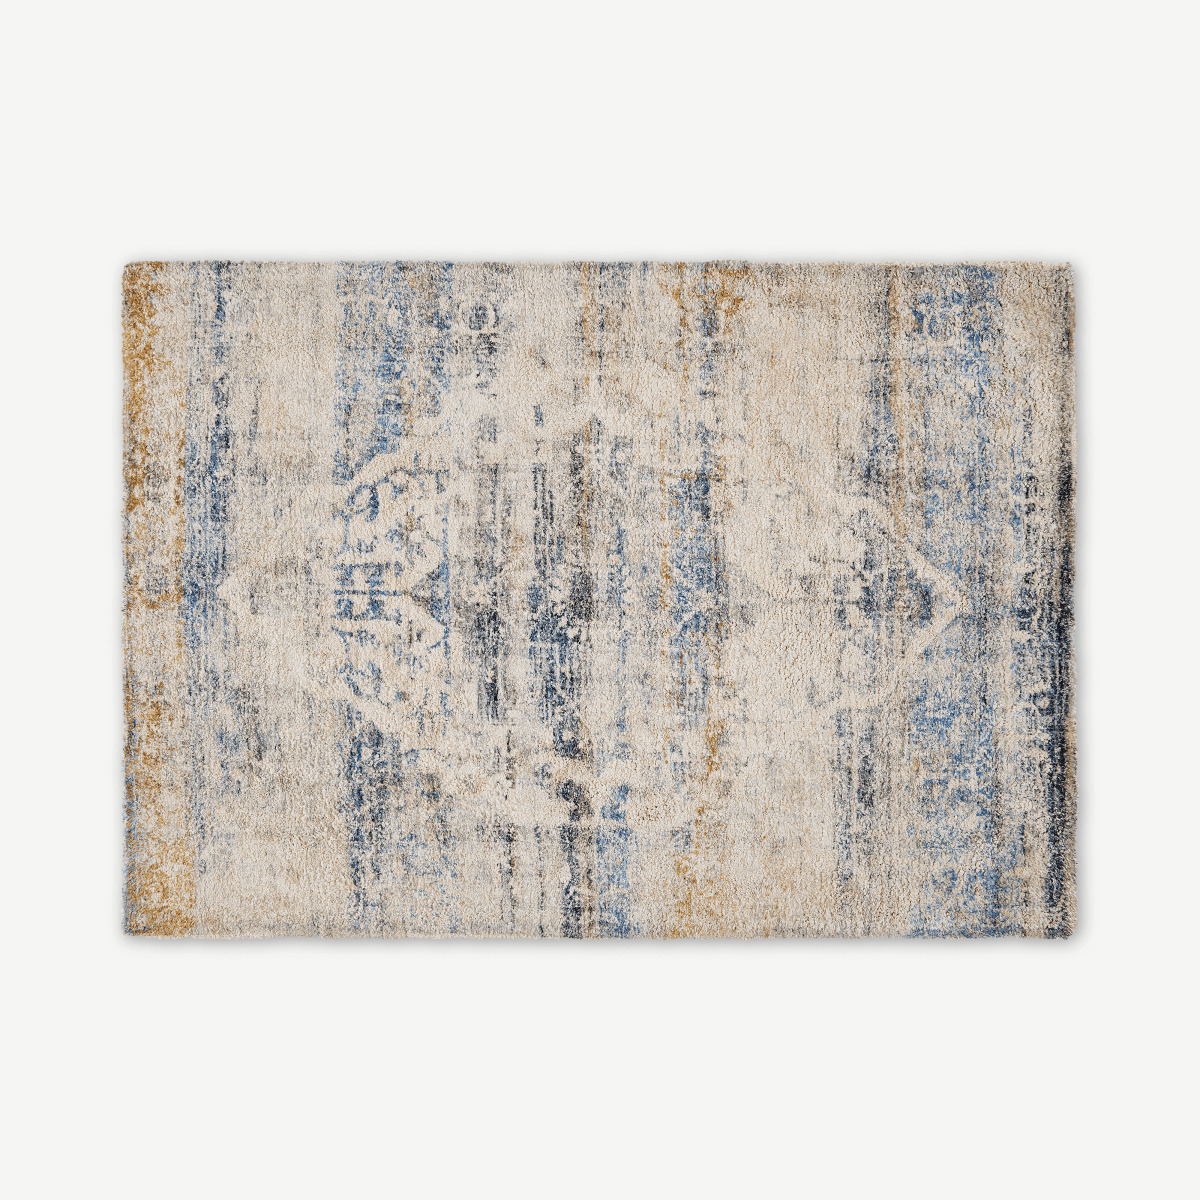 Ilyass Moroccan Style Rug, Large 160 x 230cm, Navy & Antique Gold